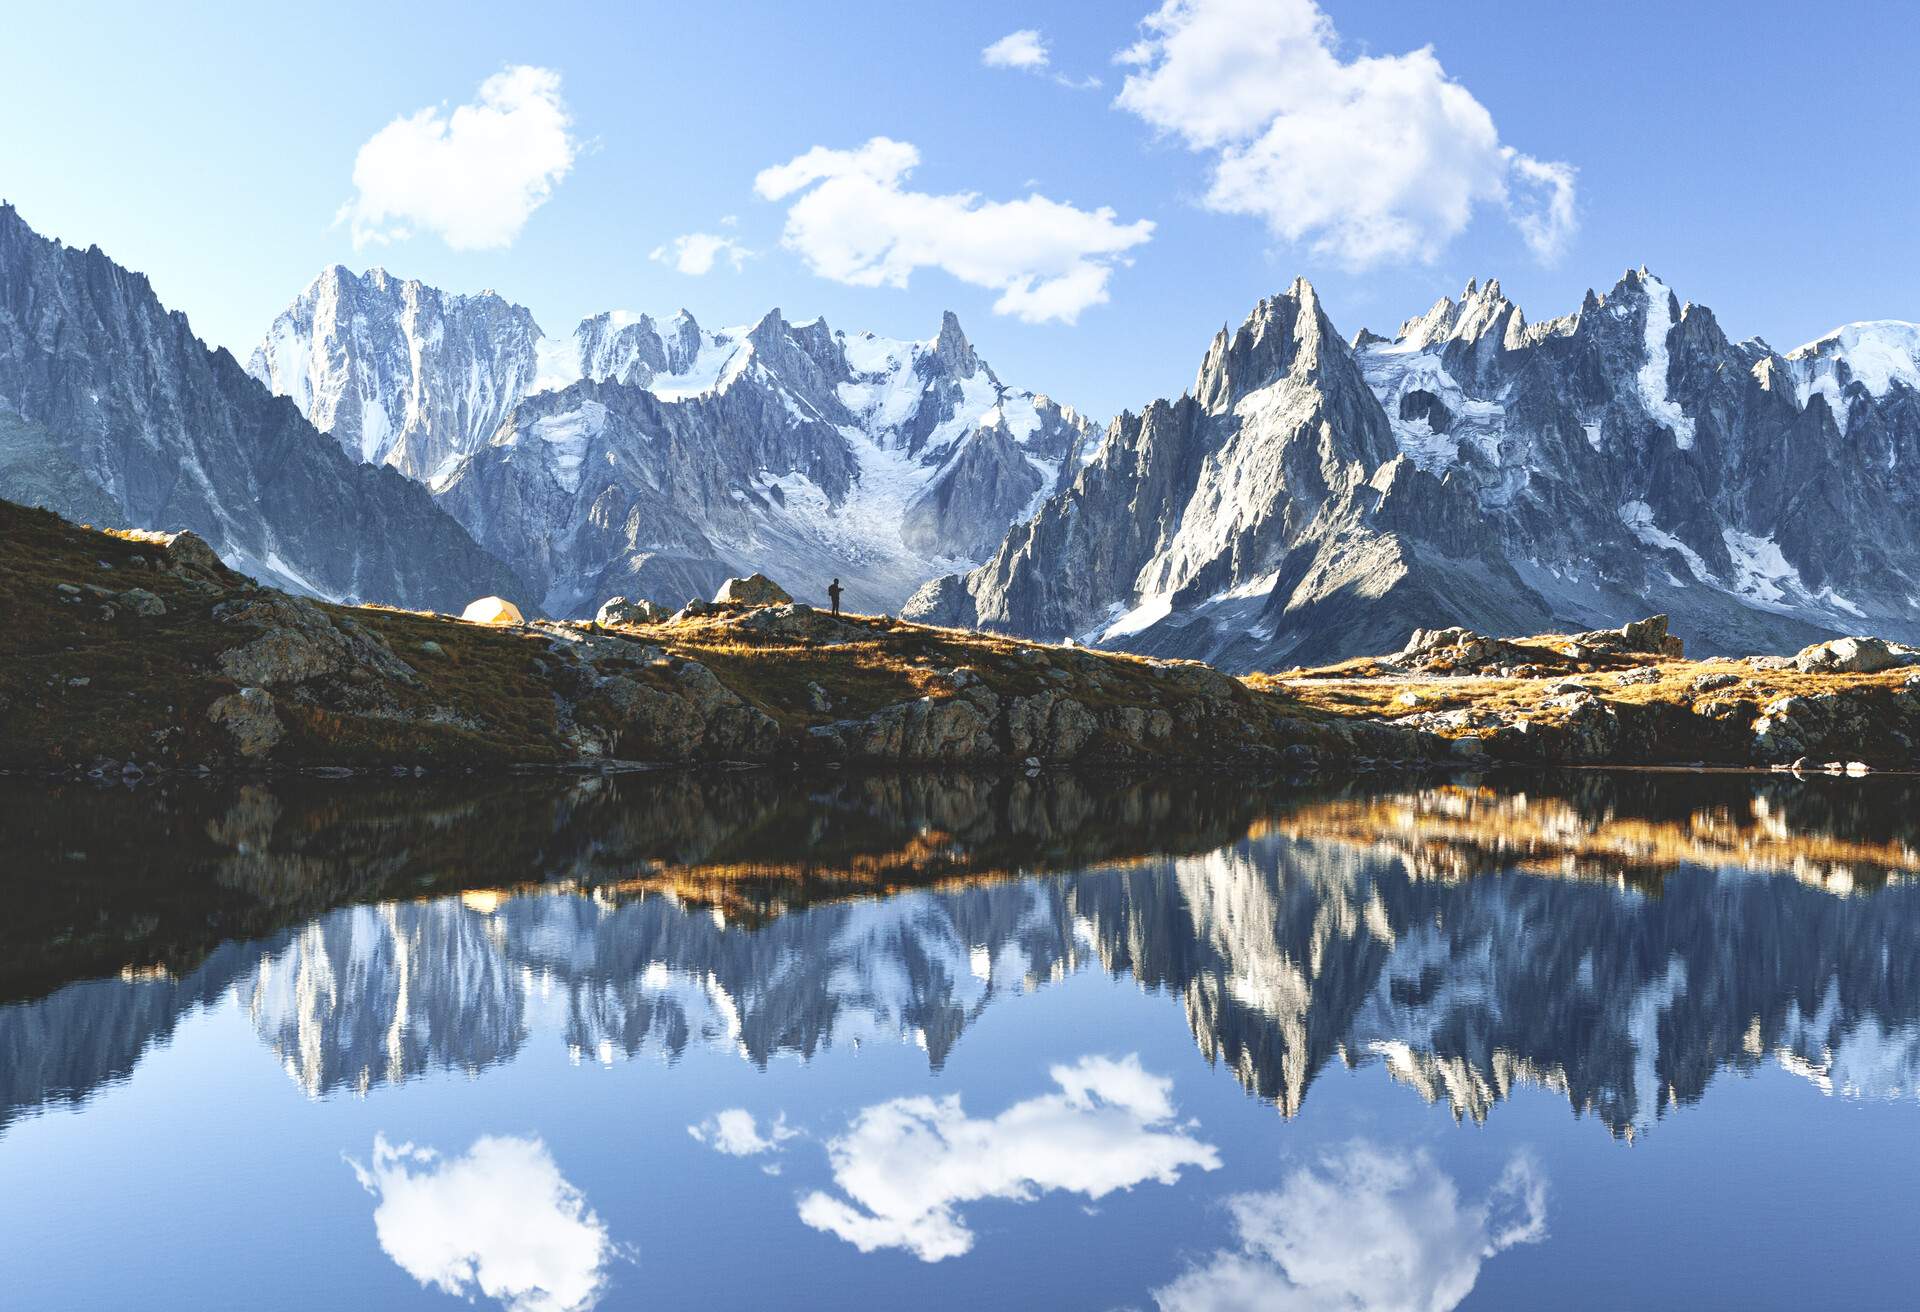 dest_france_alps_chamonix_cheserys-lake_gettyimages-1251539782_universal_within-usage-period_84132